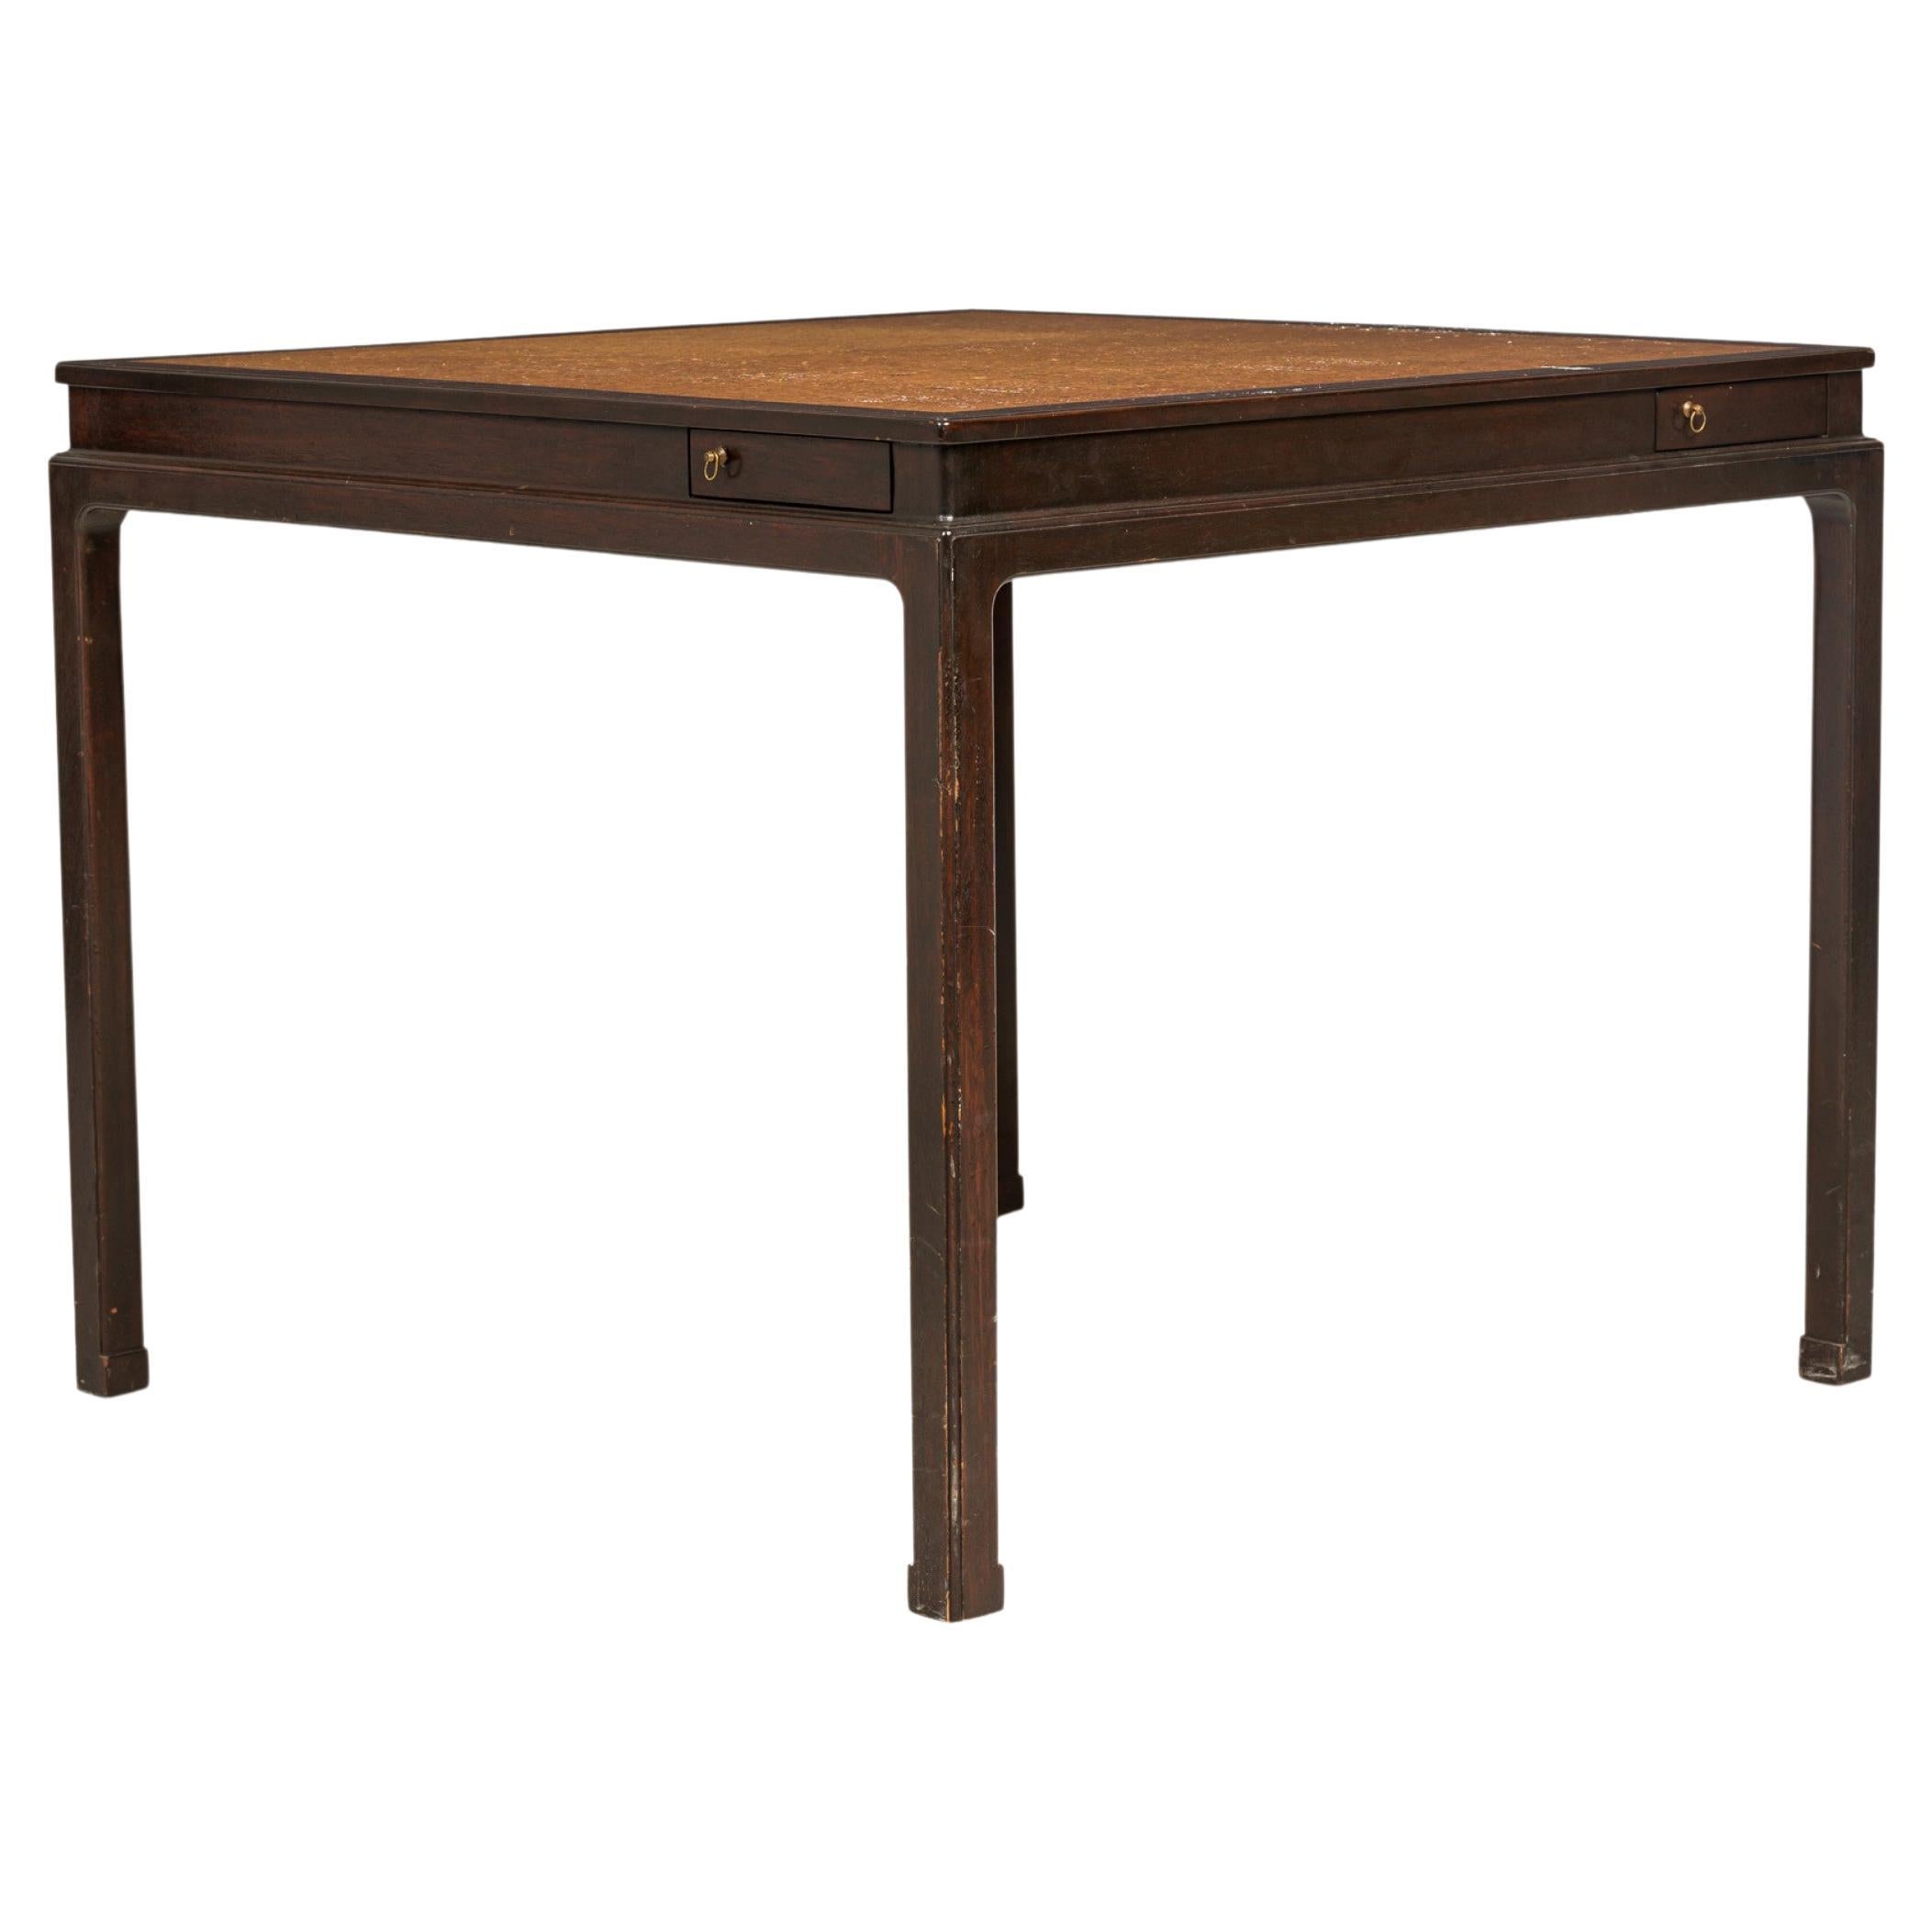 Edward J Wormley for Dunbar Cork and Wood Concealed Tray Game Table